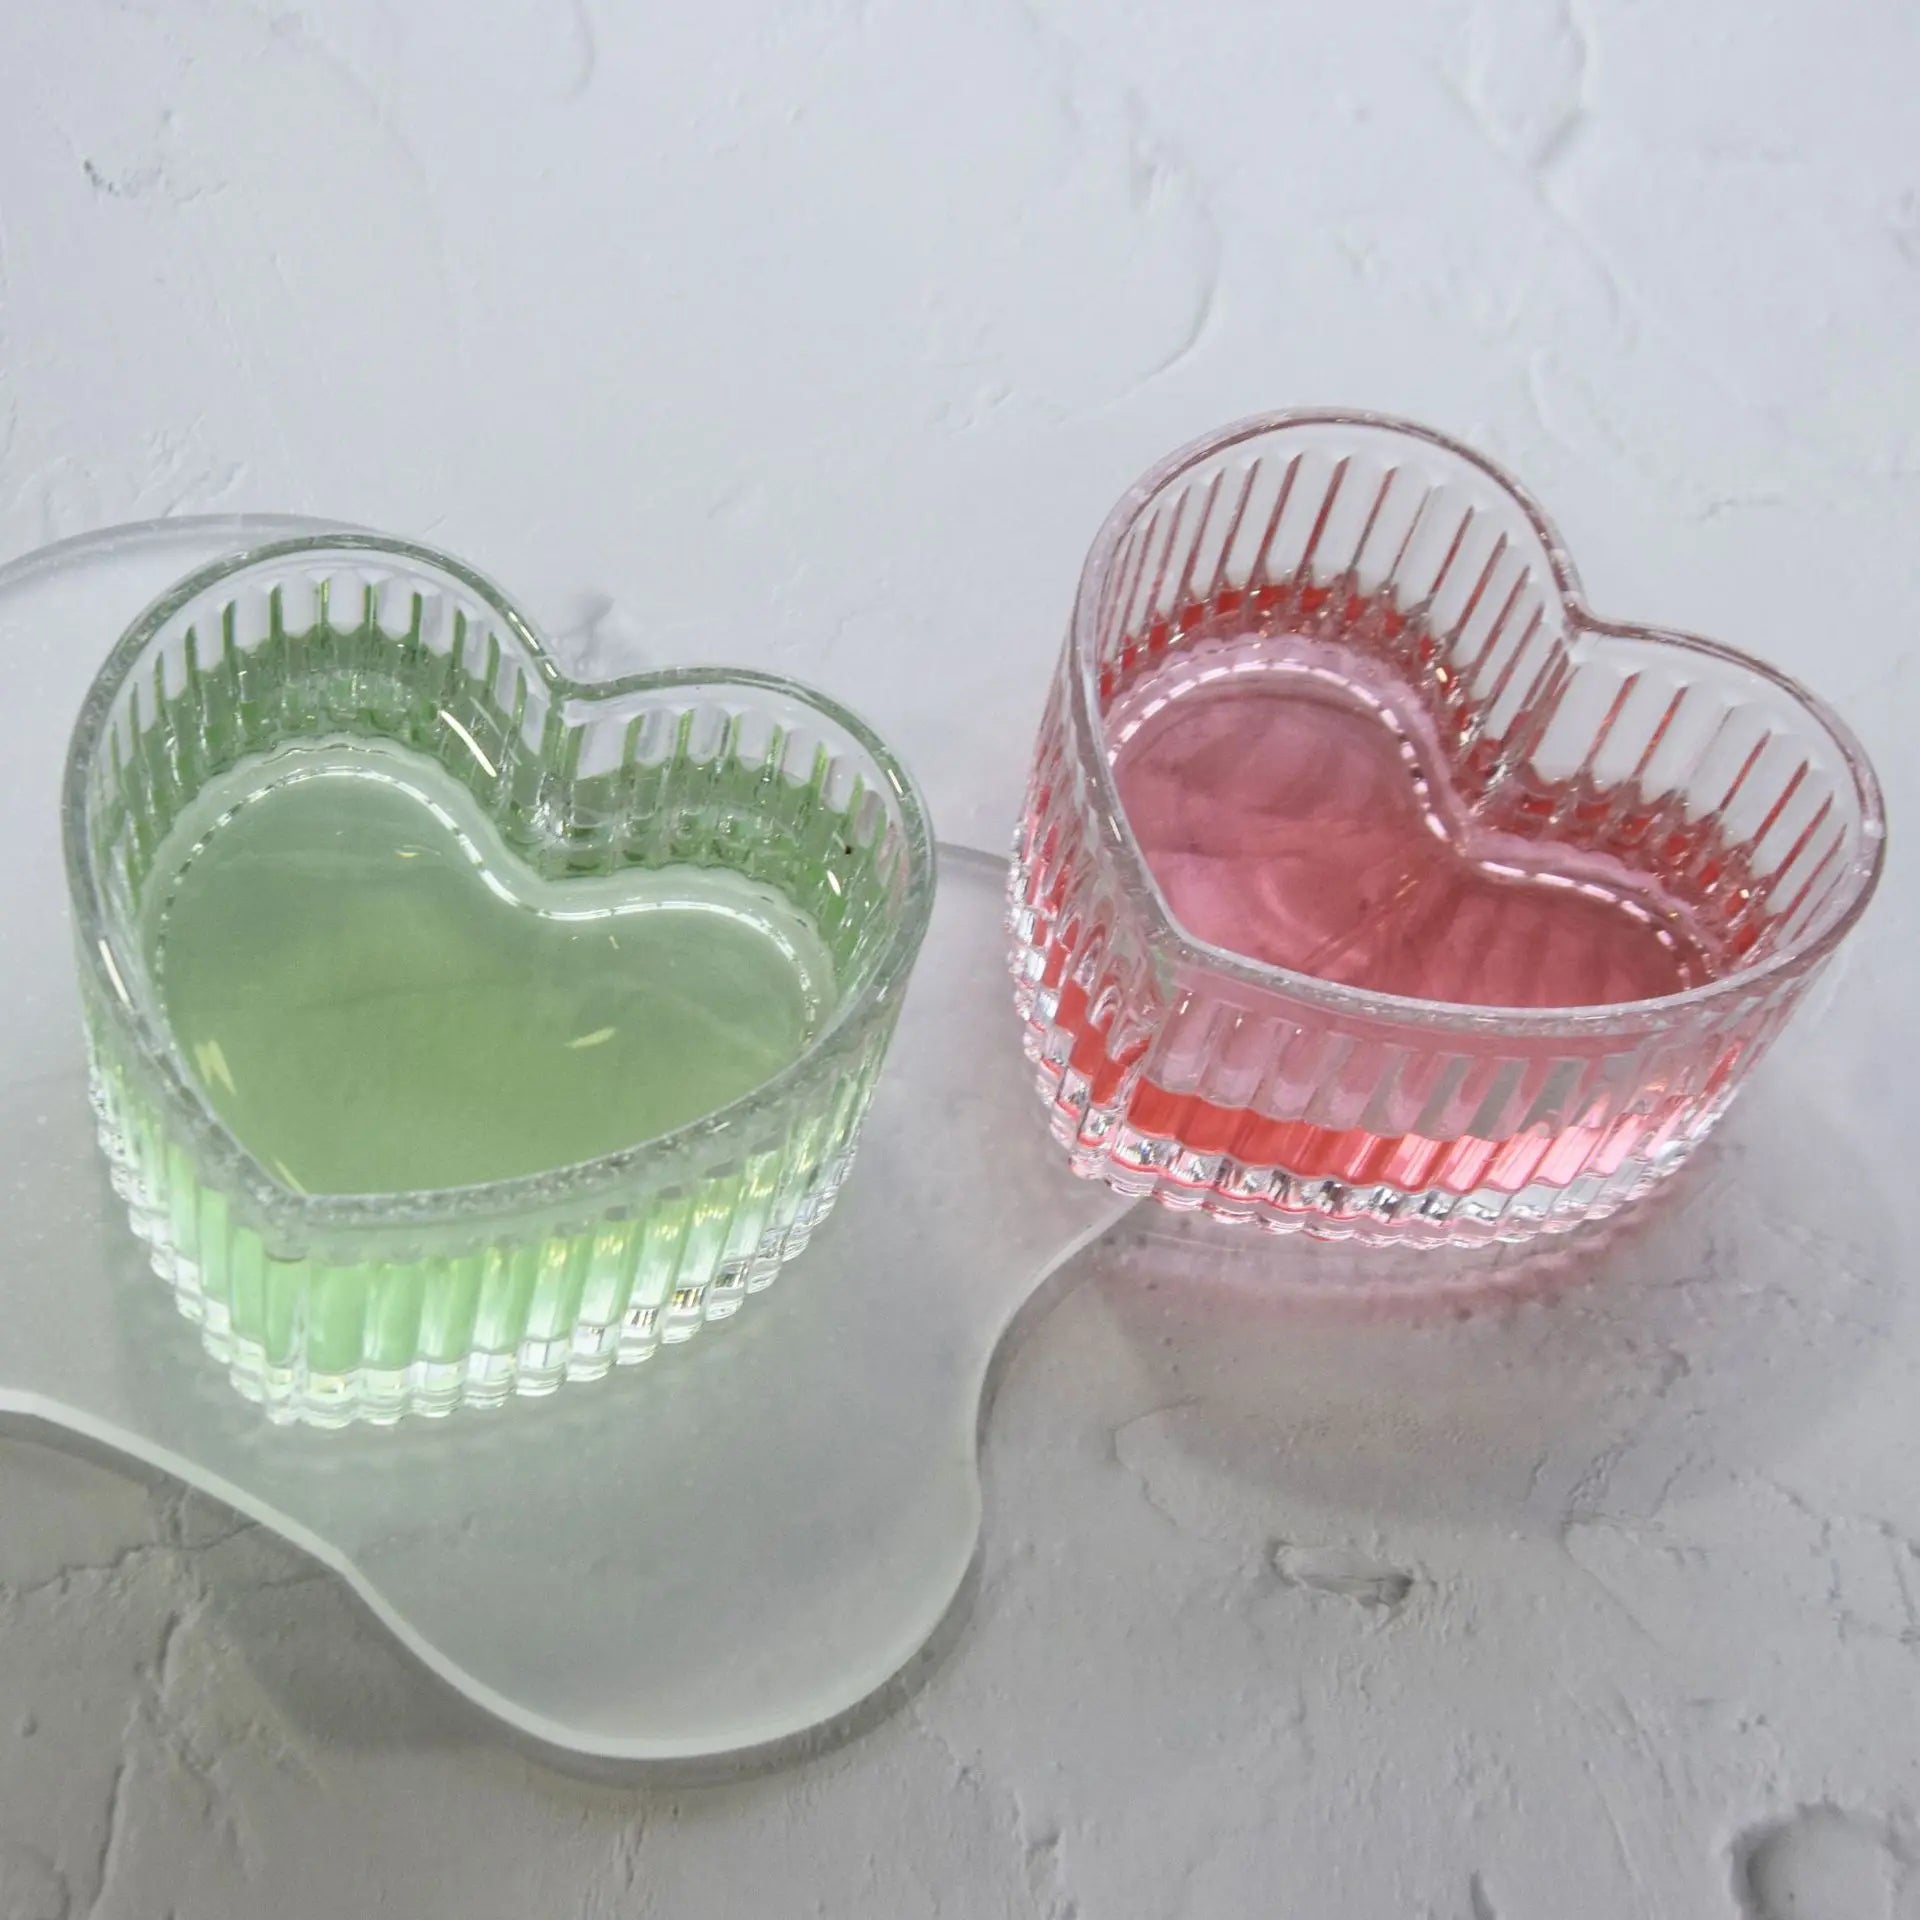 Crystal Affection Heart-Shaped Glass Bowl